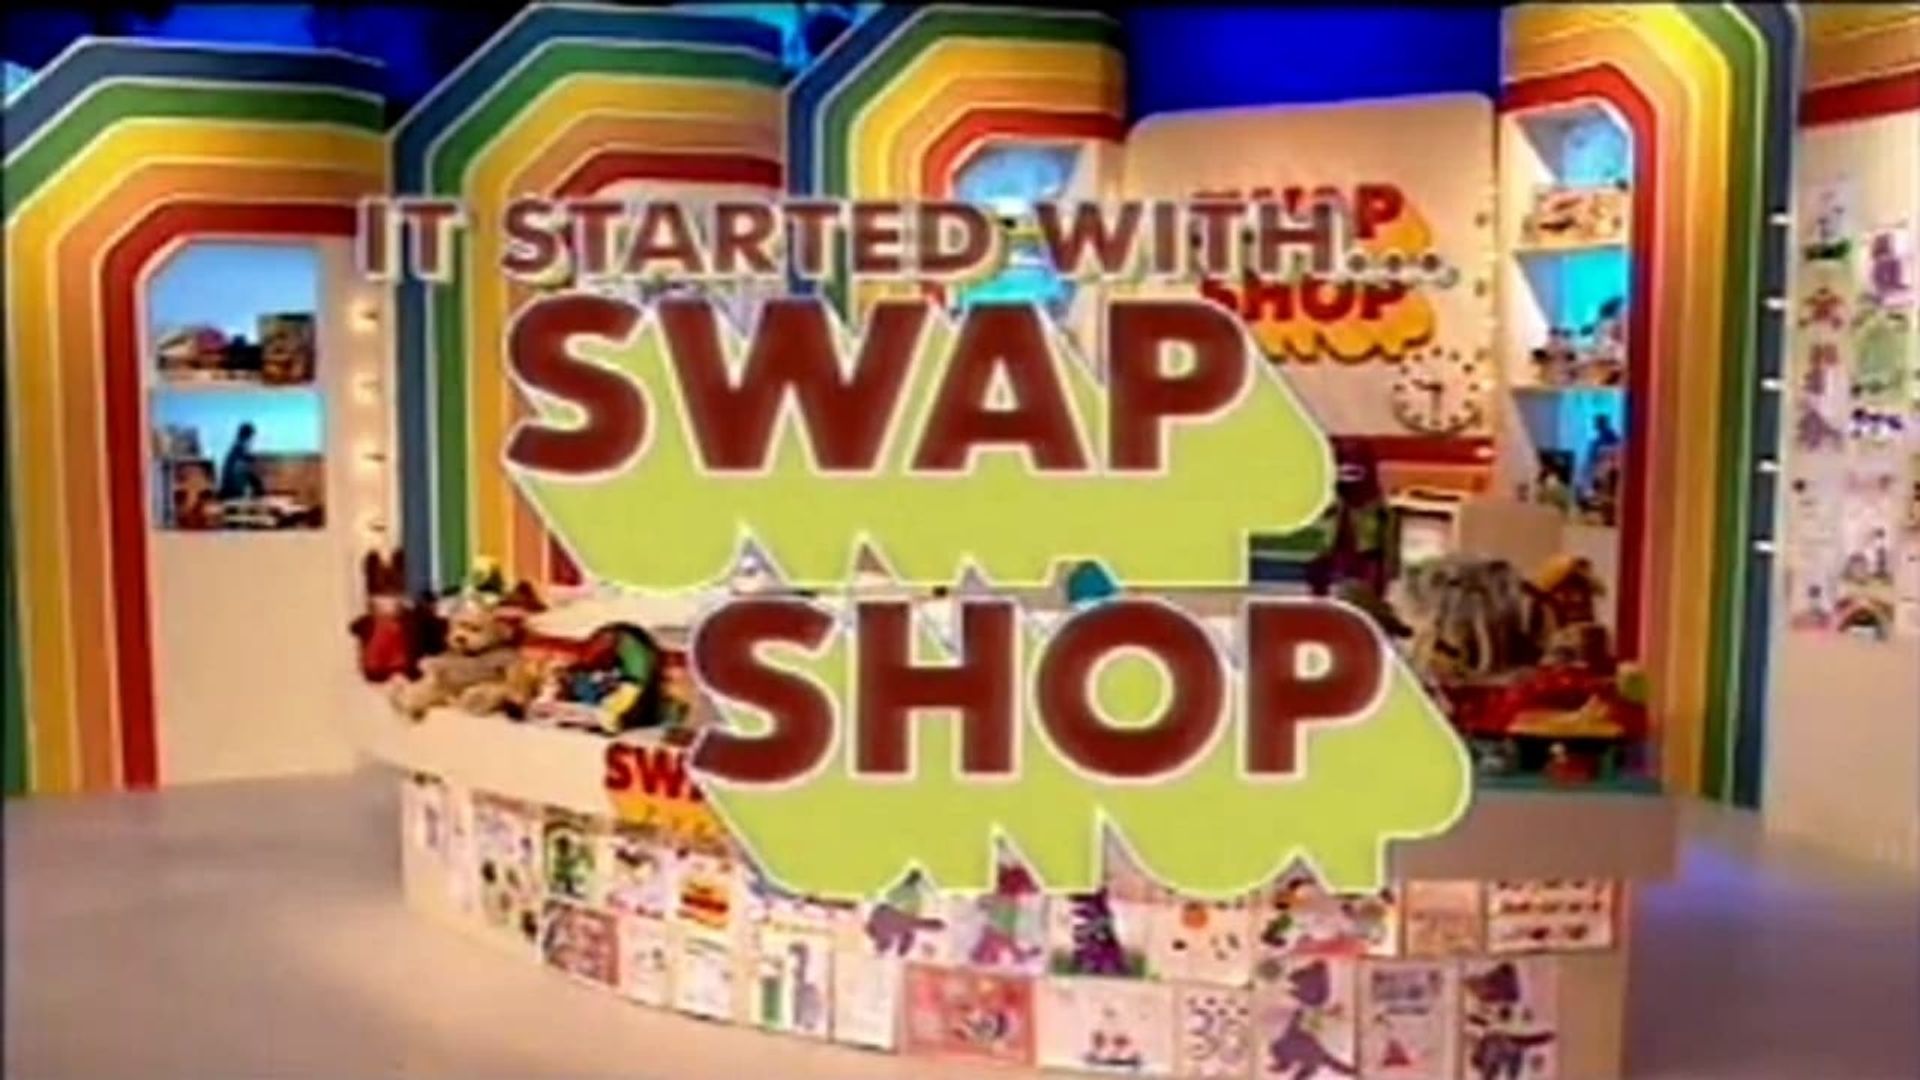 It Started with... Swap Shop background